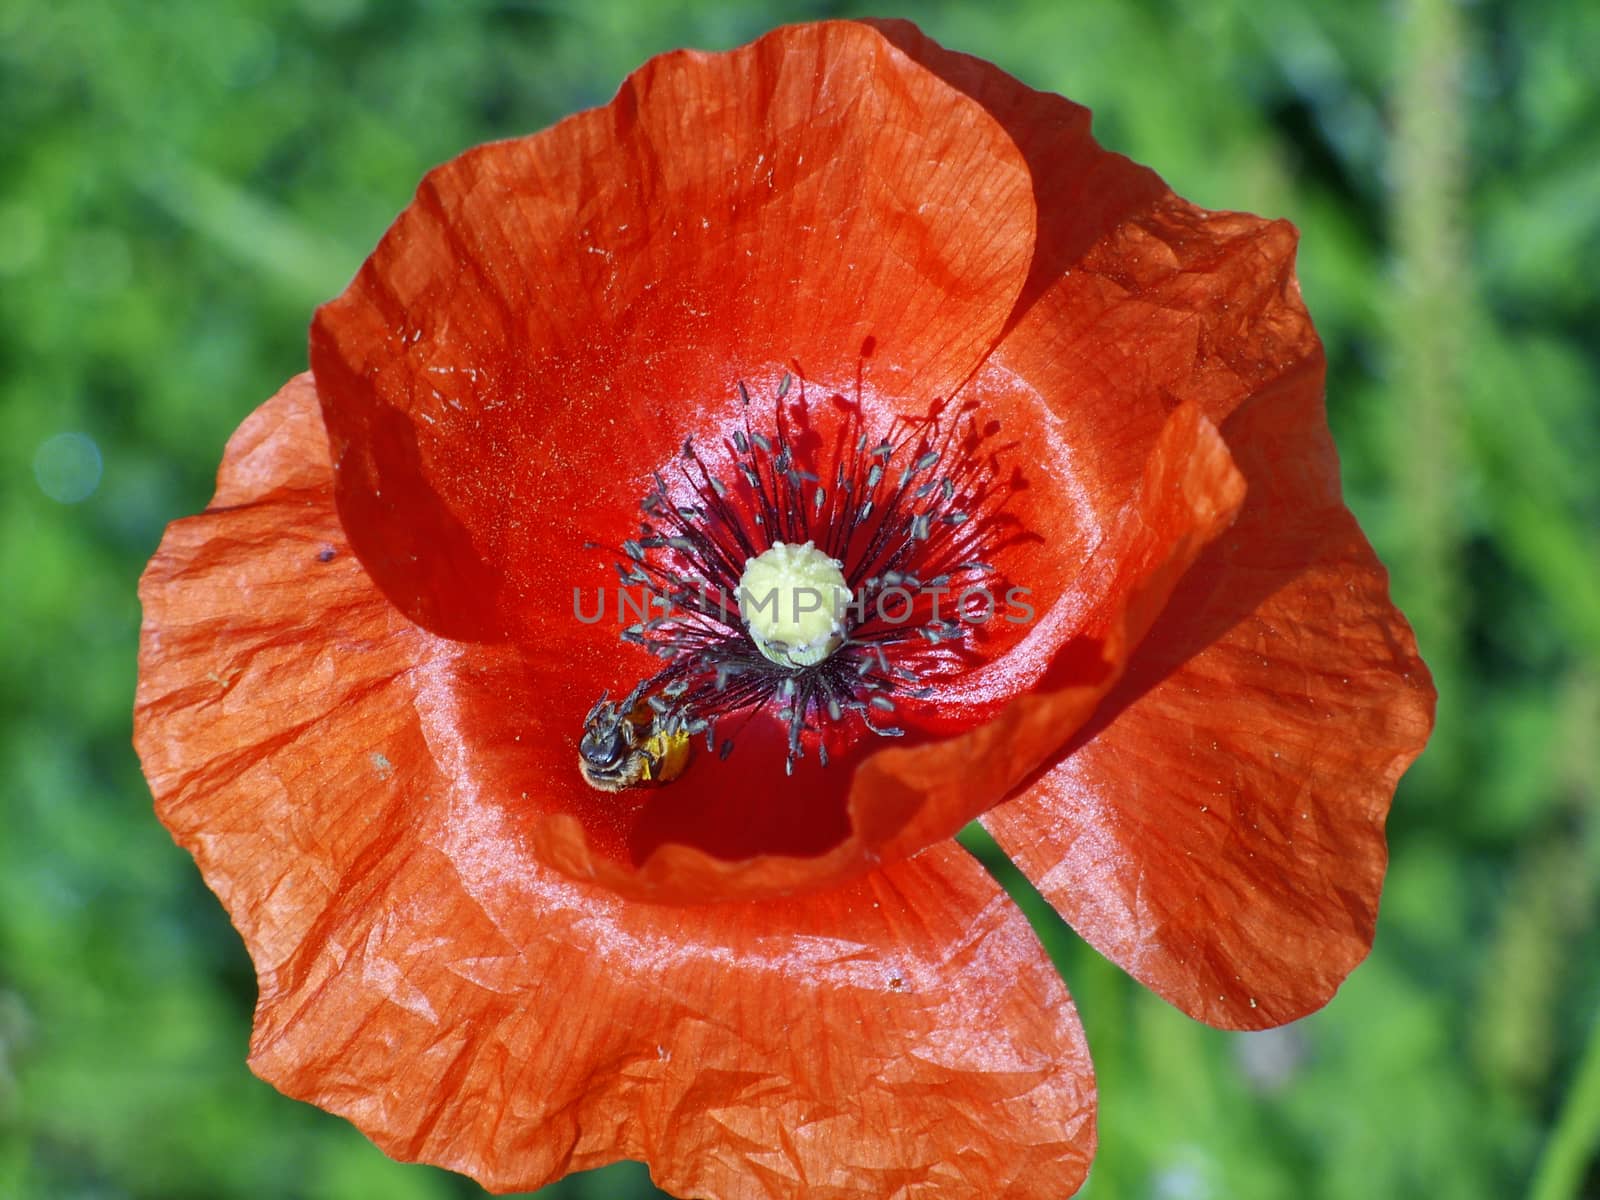 Red poppy flower on green grass background and bee